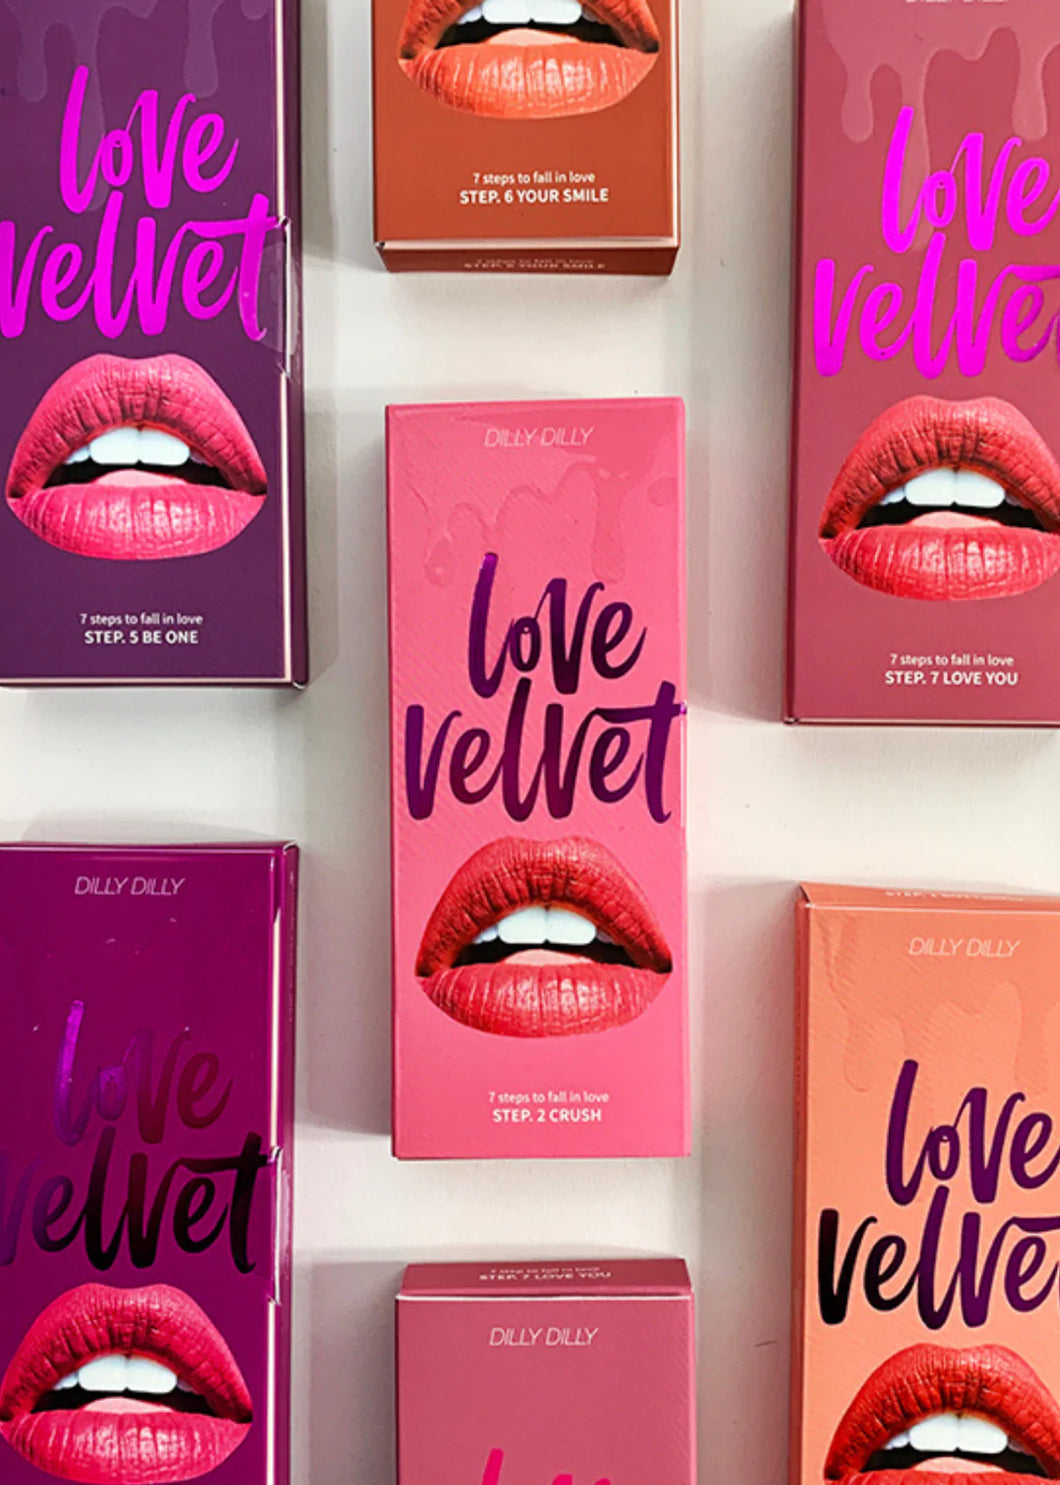 Love Velvet Moisture Liquid Lip Gloss Step 1 to 7  A multi-tasking natural, blendable velvety formula that provides  hydration and sublime buildable color to enhance your eyes, lips and  cheeks. The best price, deal and quality w/ Bonitawholesale.com